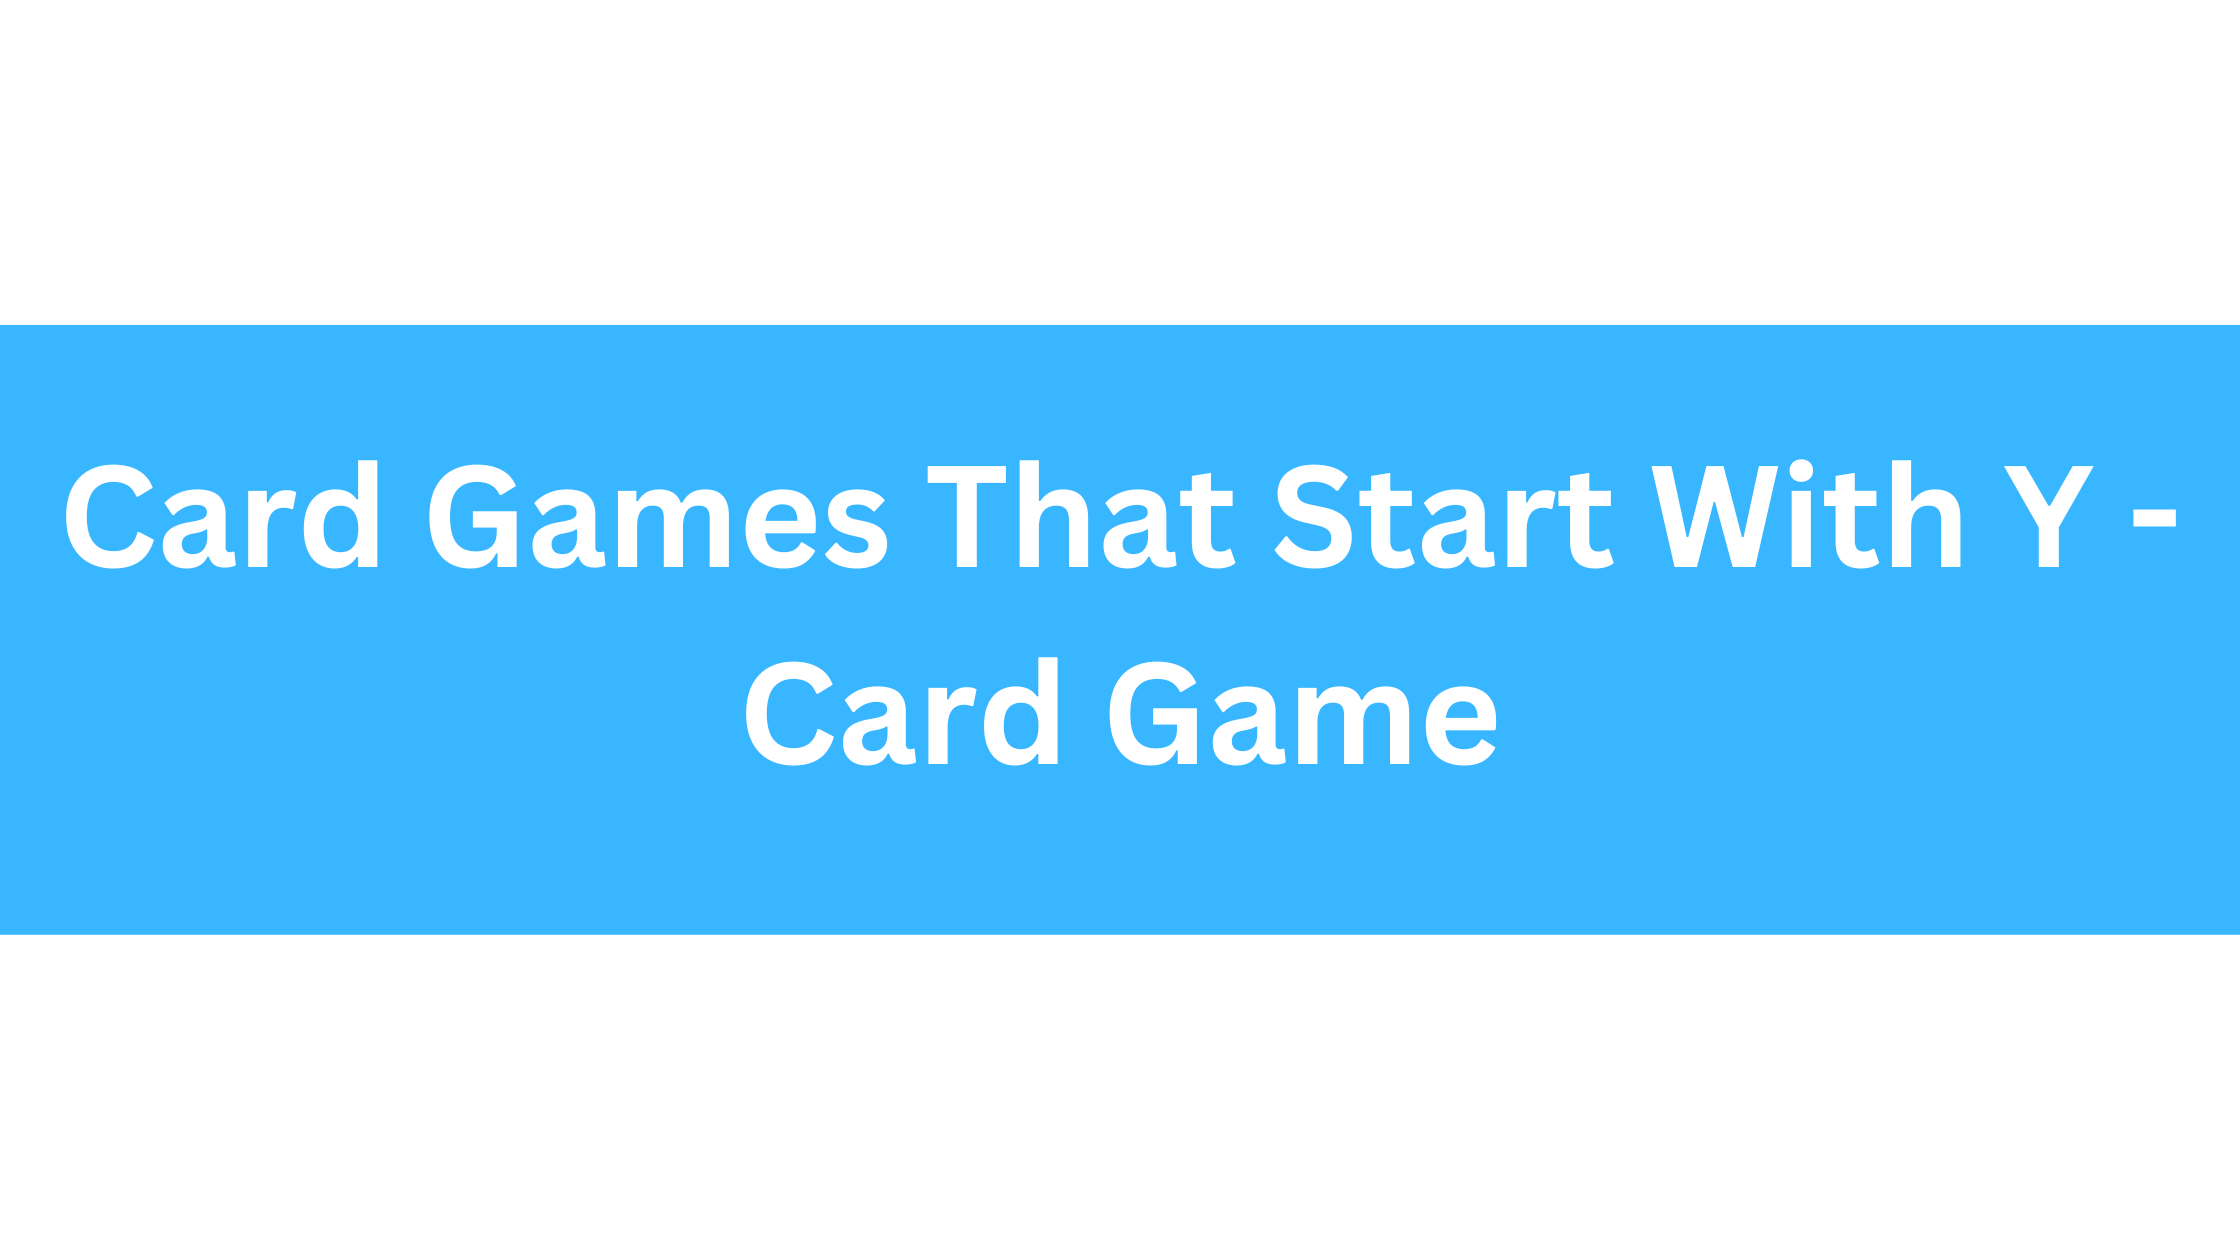 Card Games That Start With Y